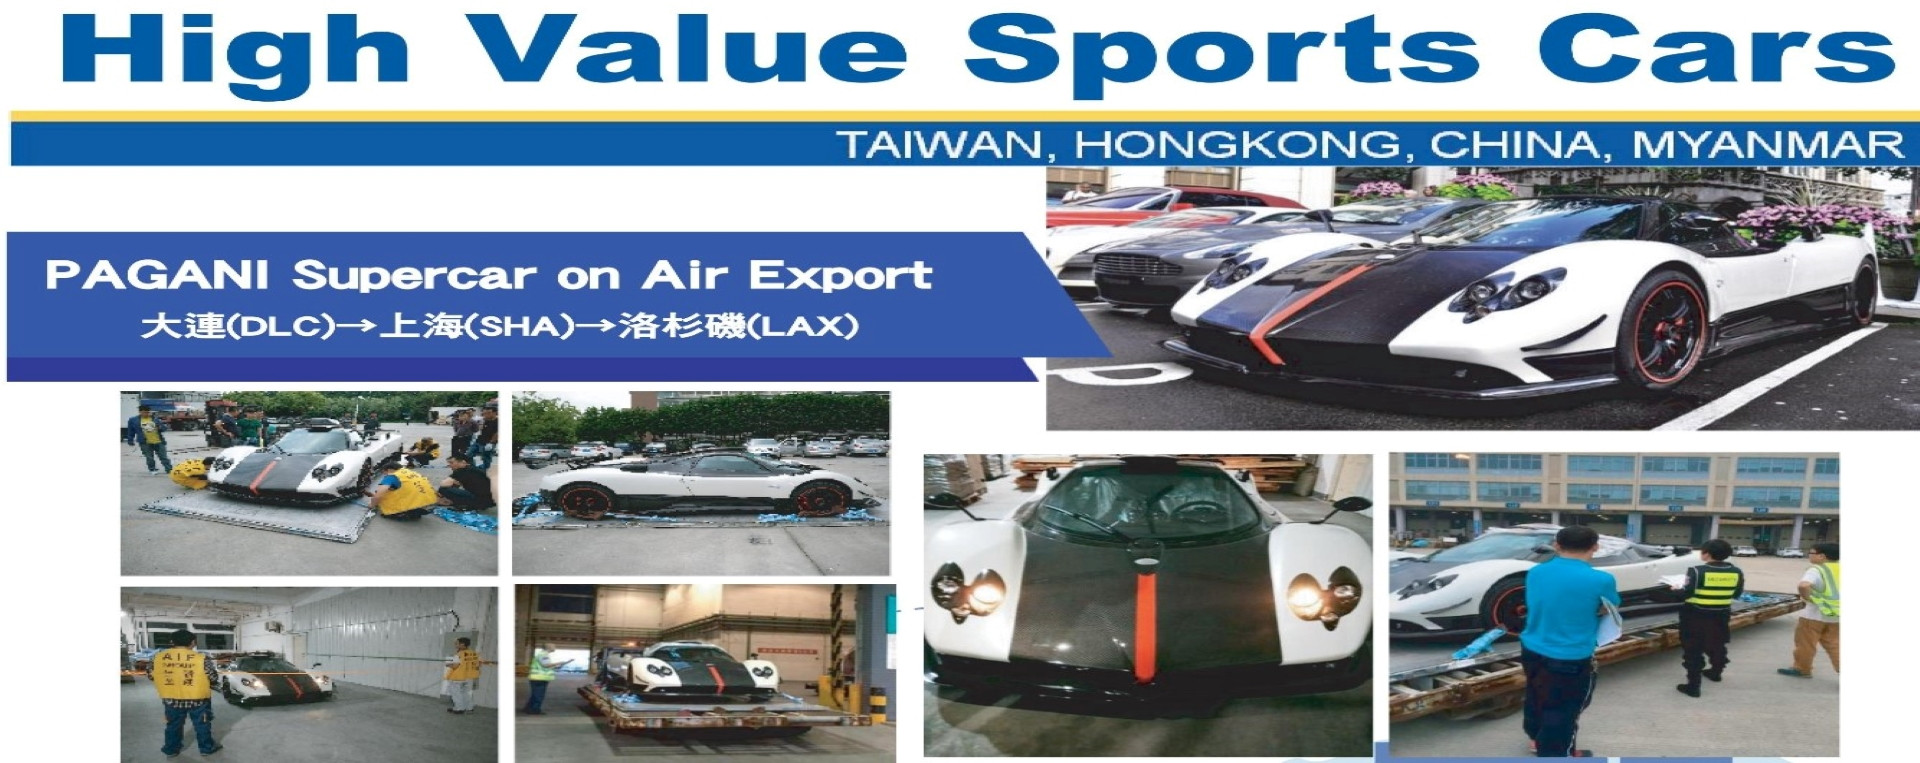 High Value Sports Cars 2